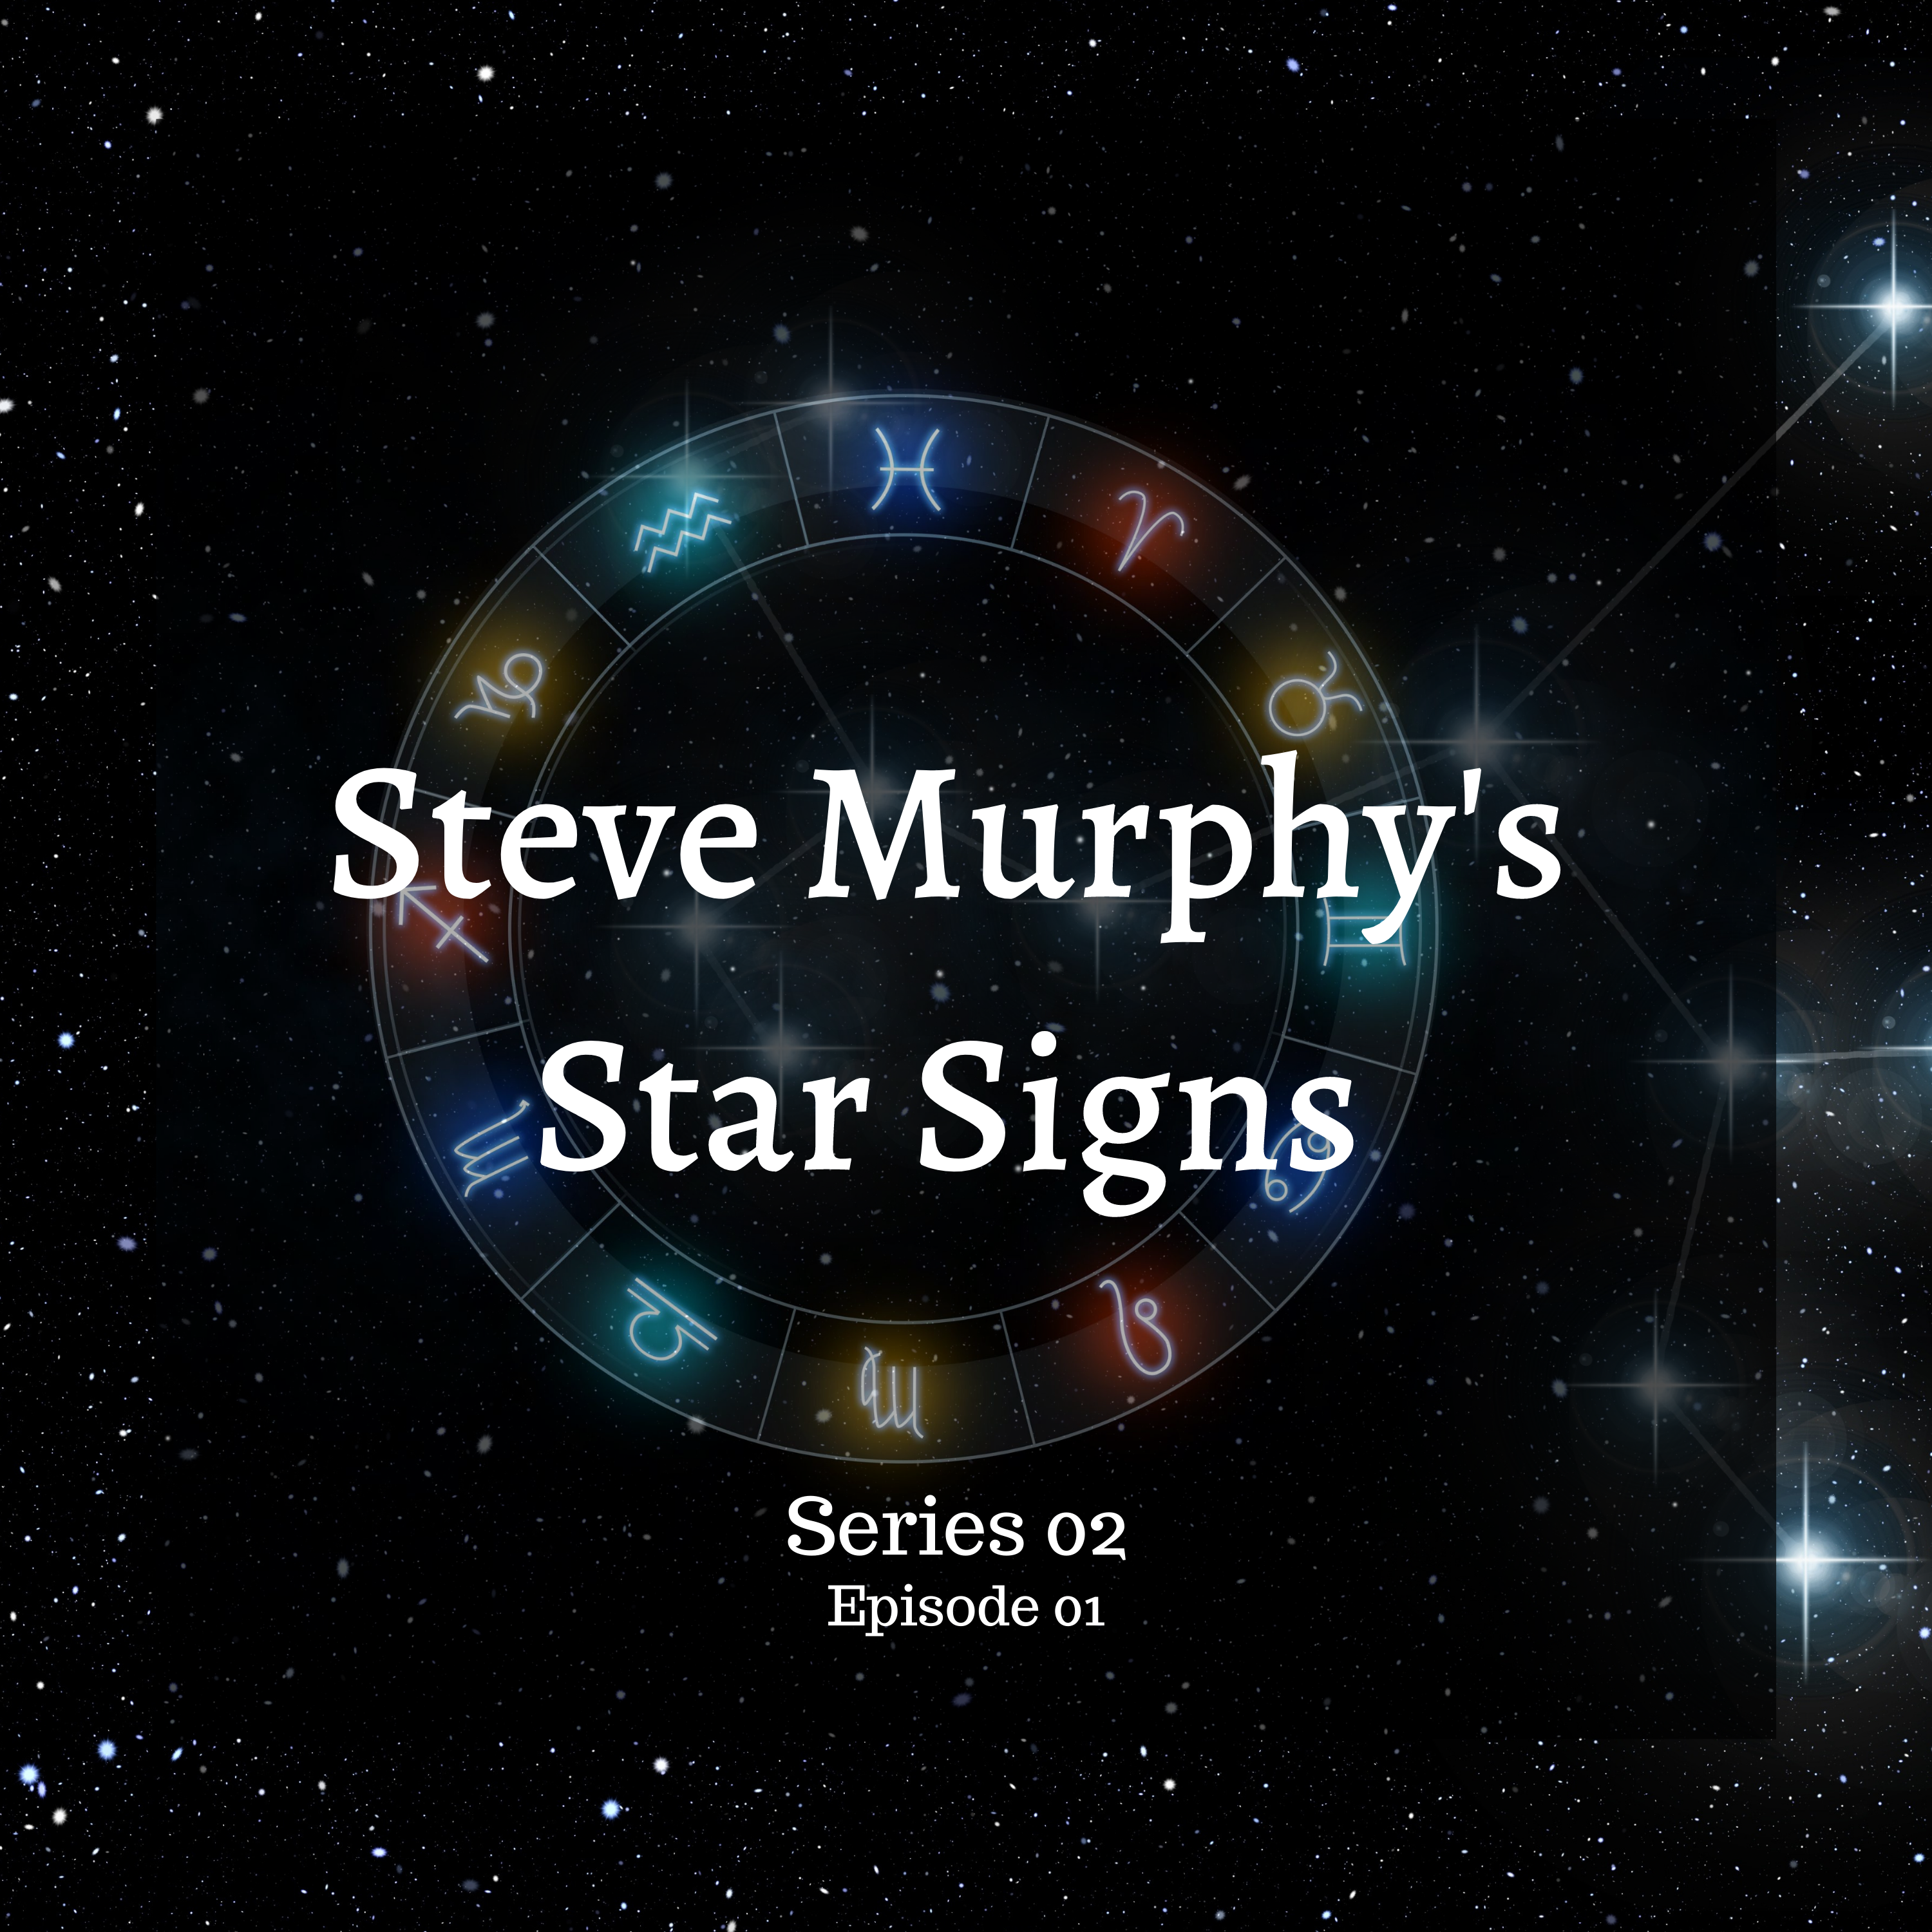 A New Year - Your Star Signs Report wc January 4th 2021